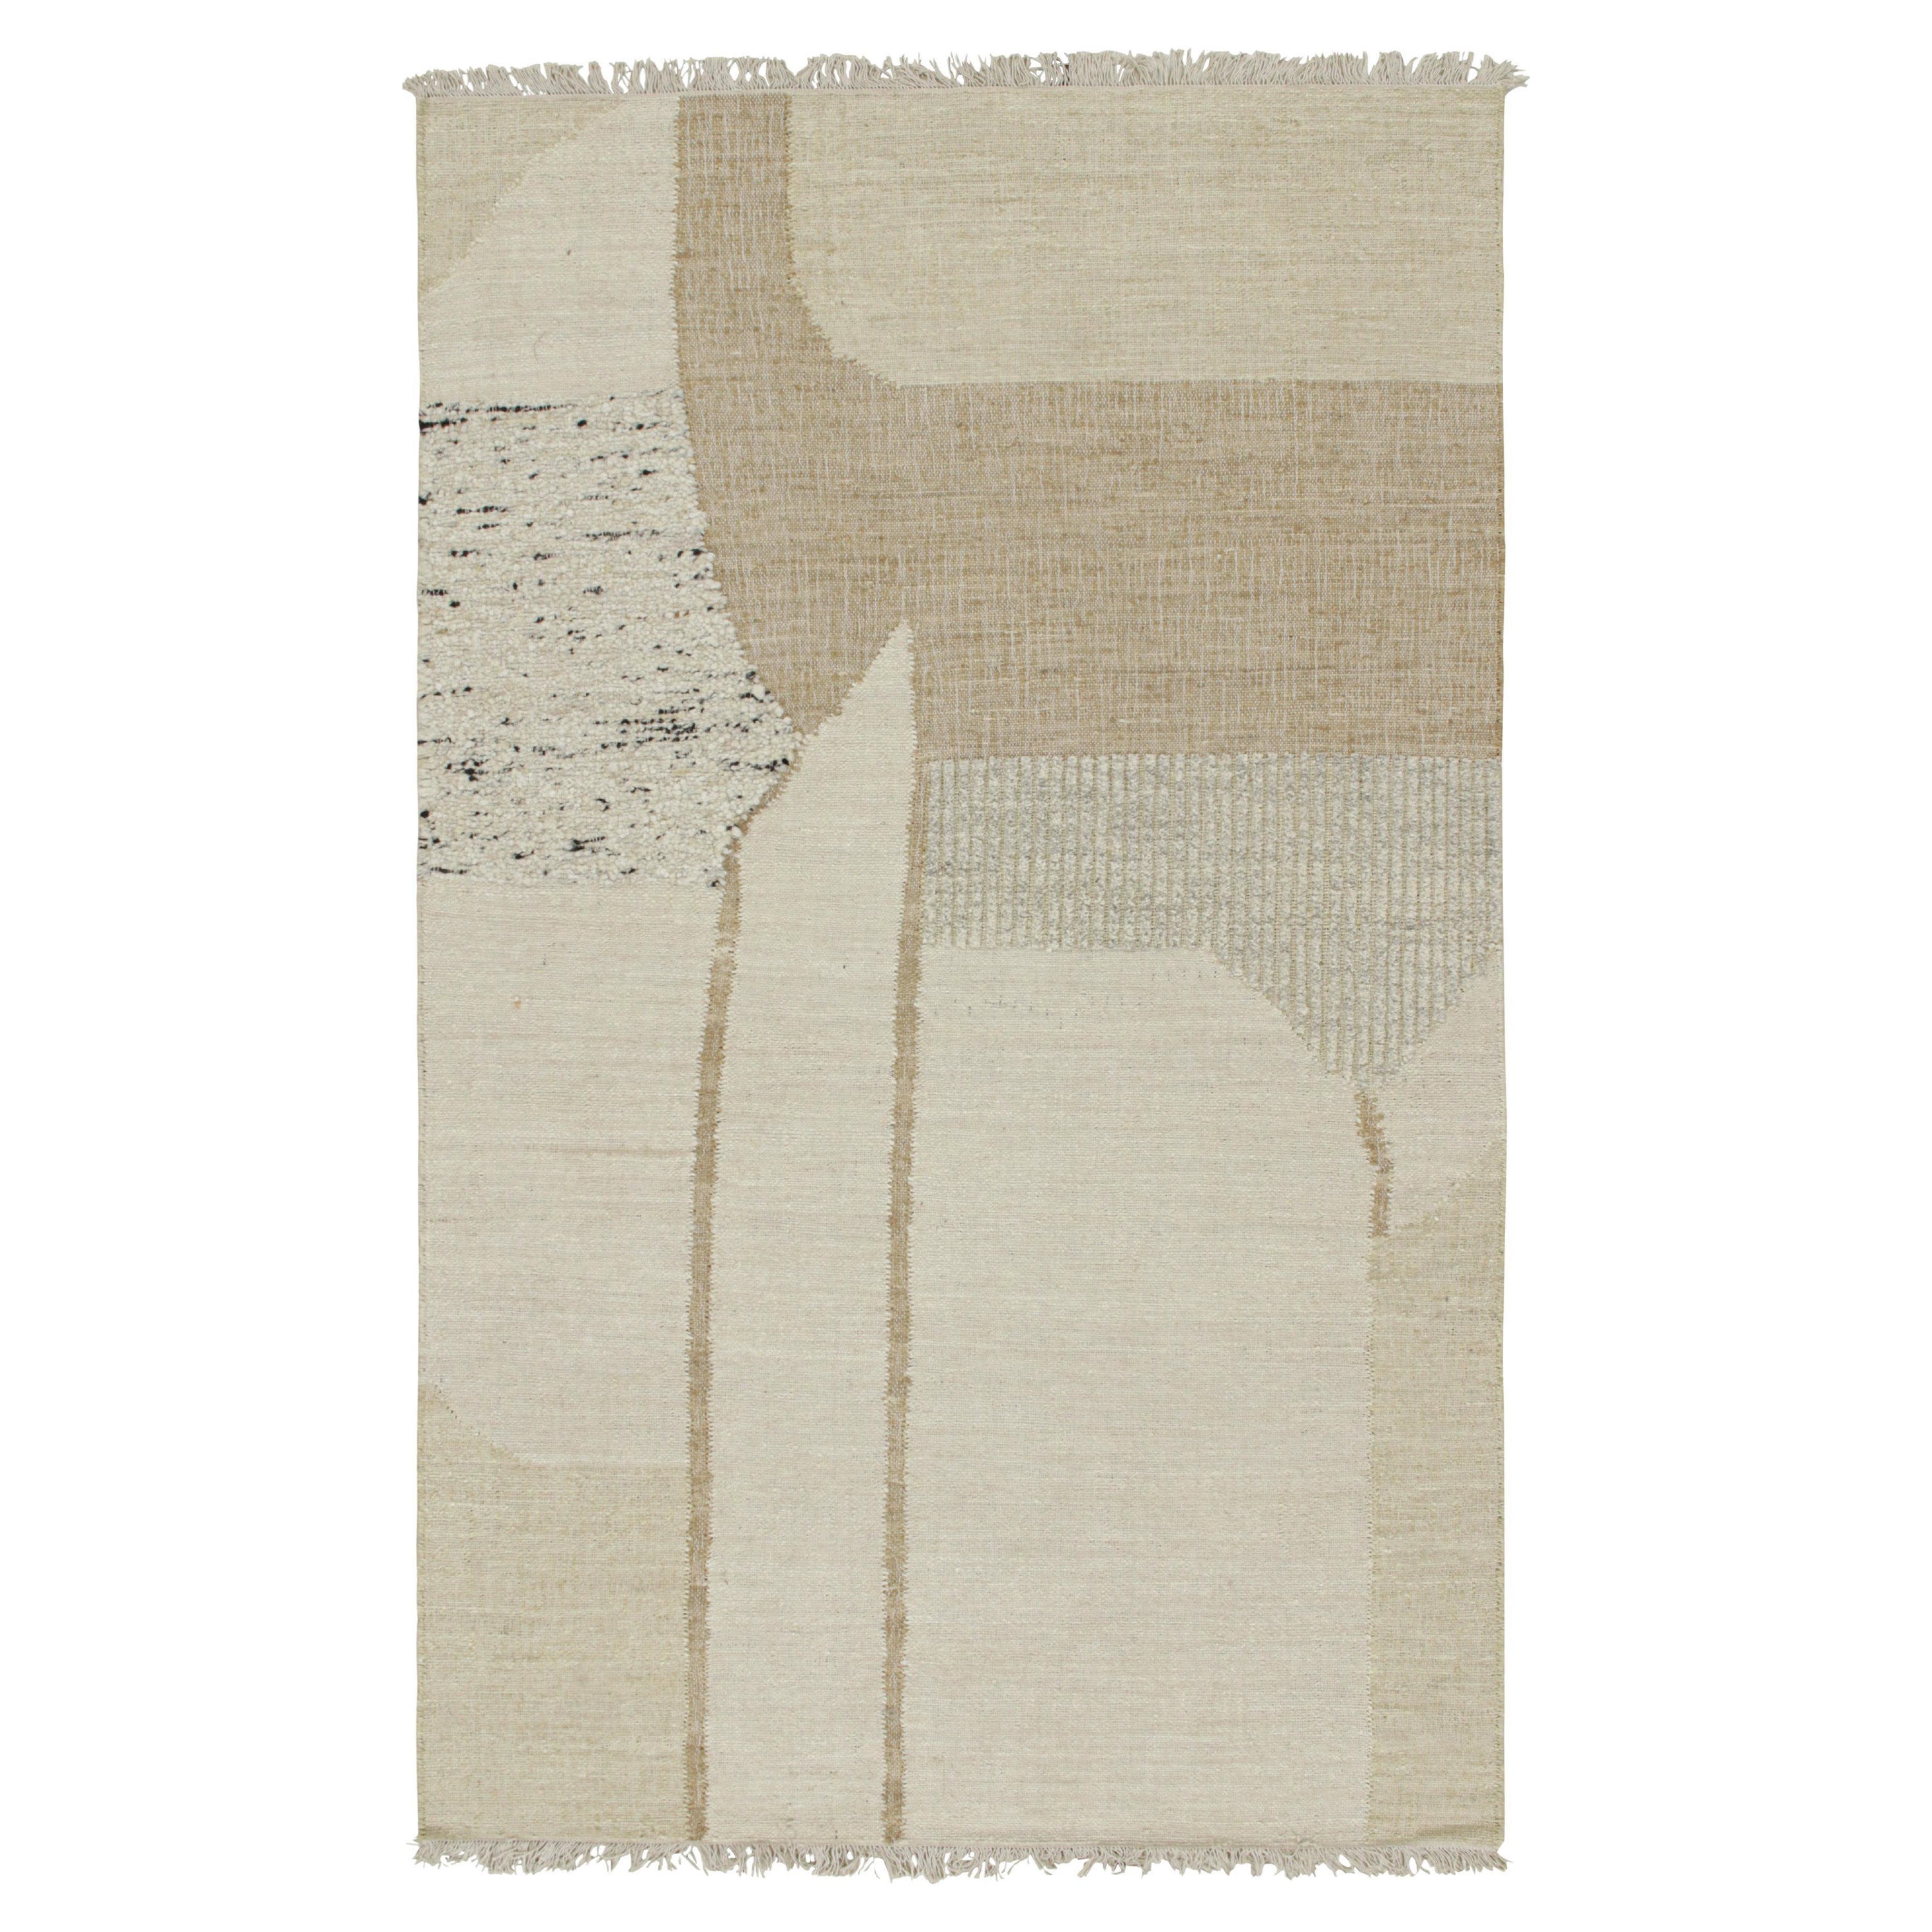 Reug & Kilims Contemporary Kelim-Teppich in Brown, White & Black Abstract Pattern